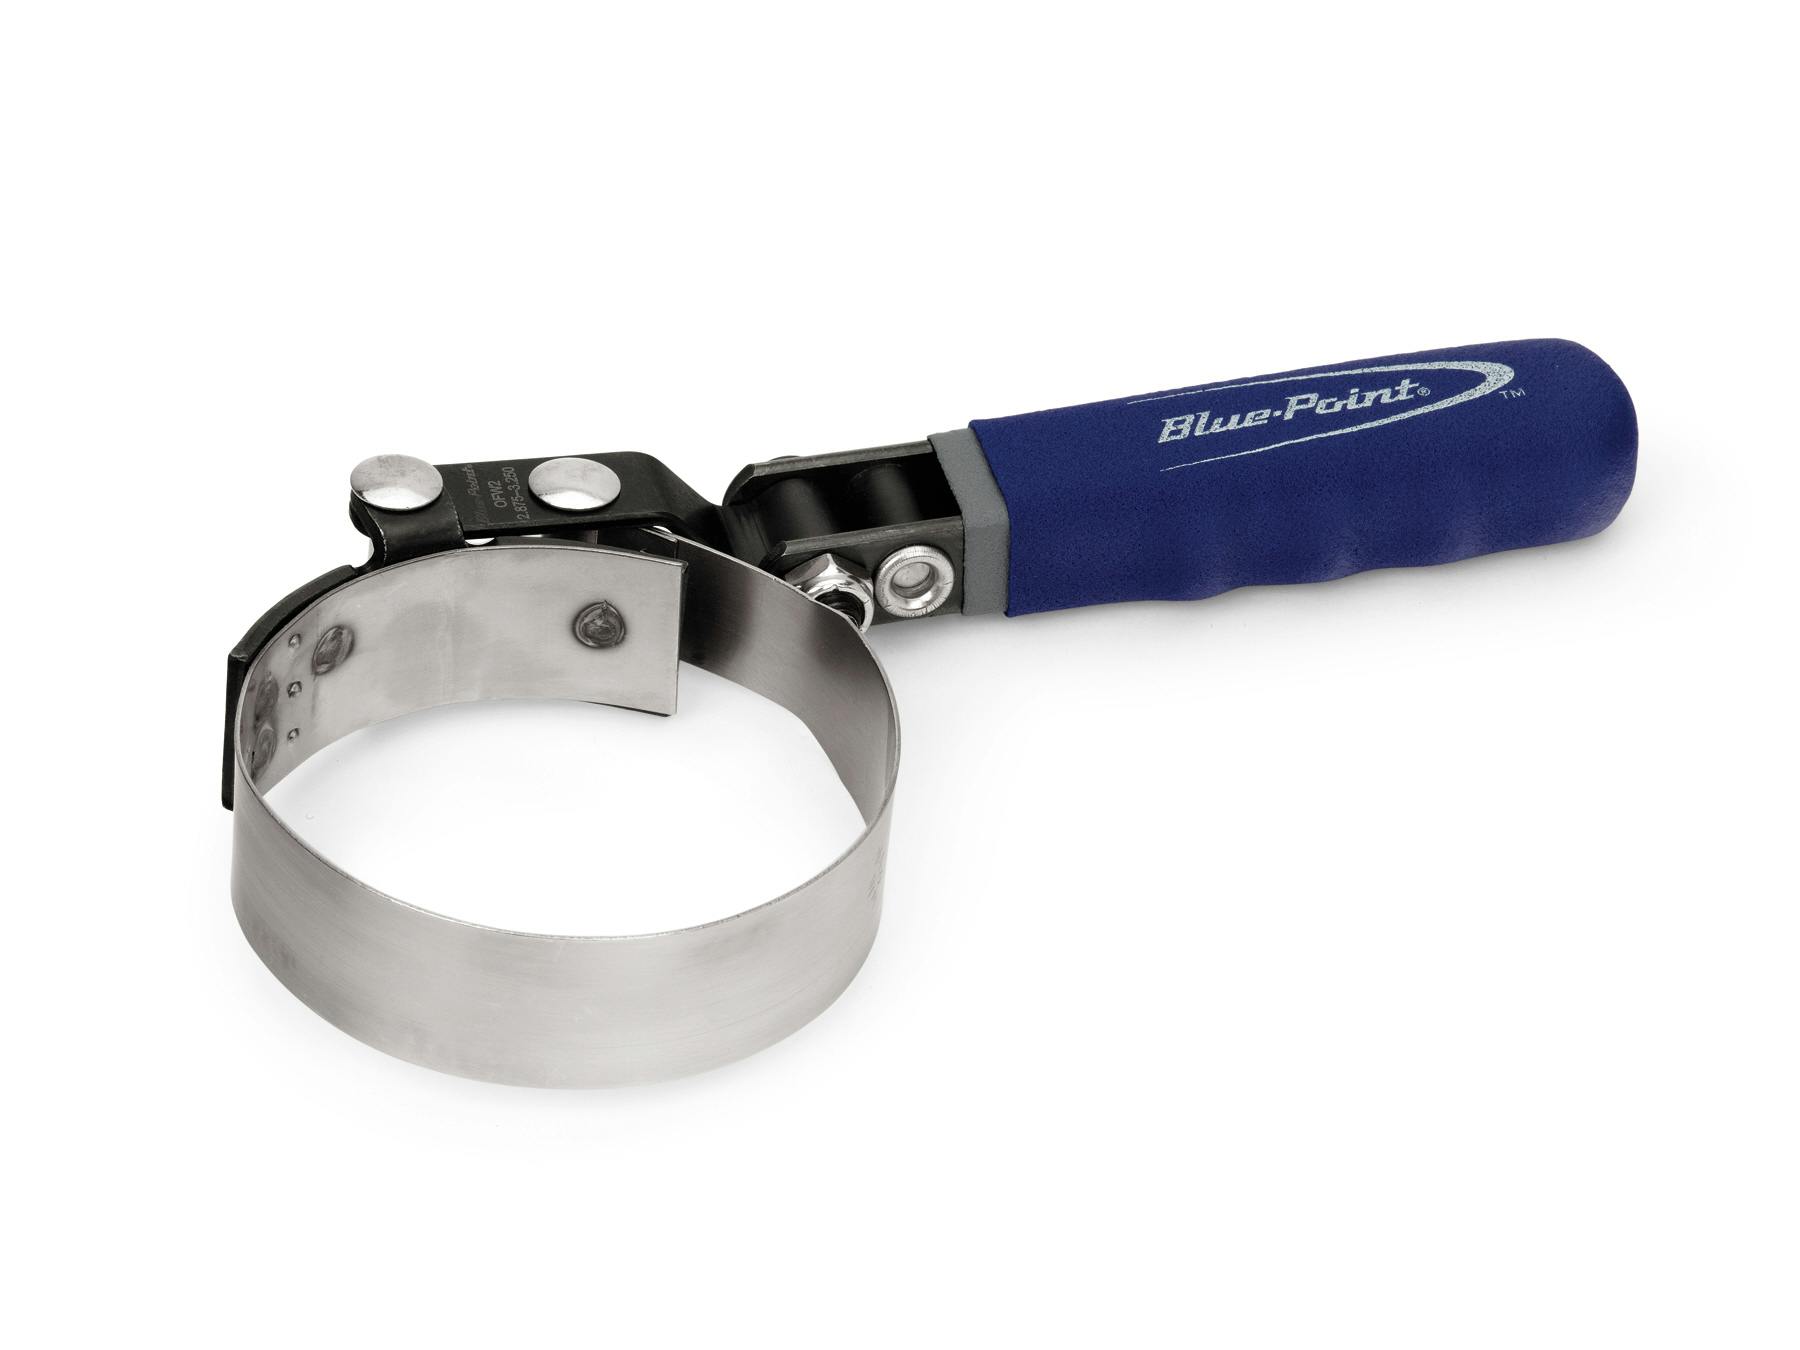 Oil Filter Wrench (Blue-Point®), OFW2